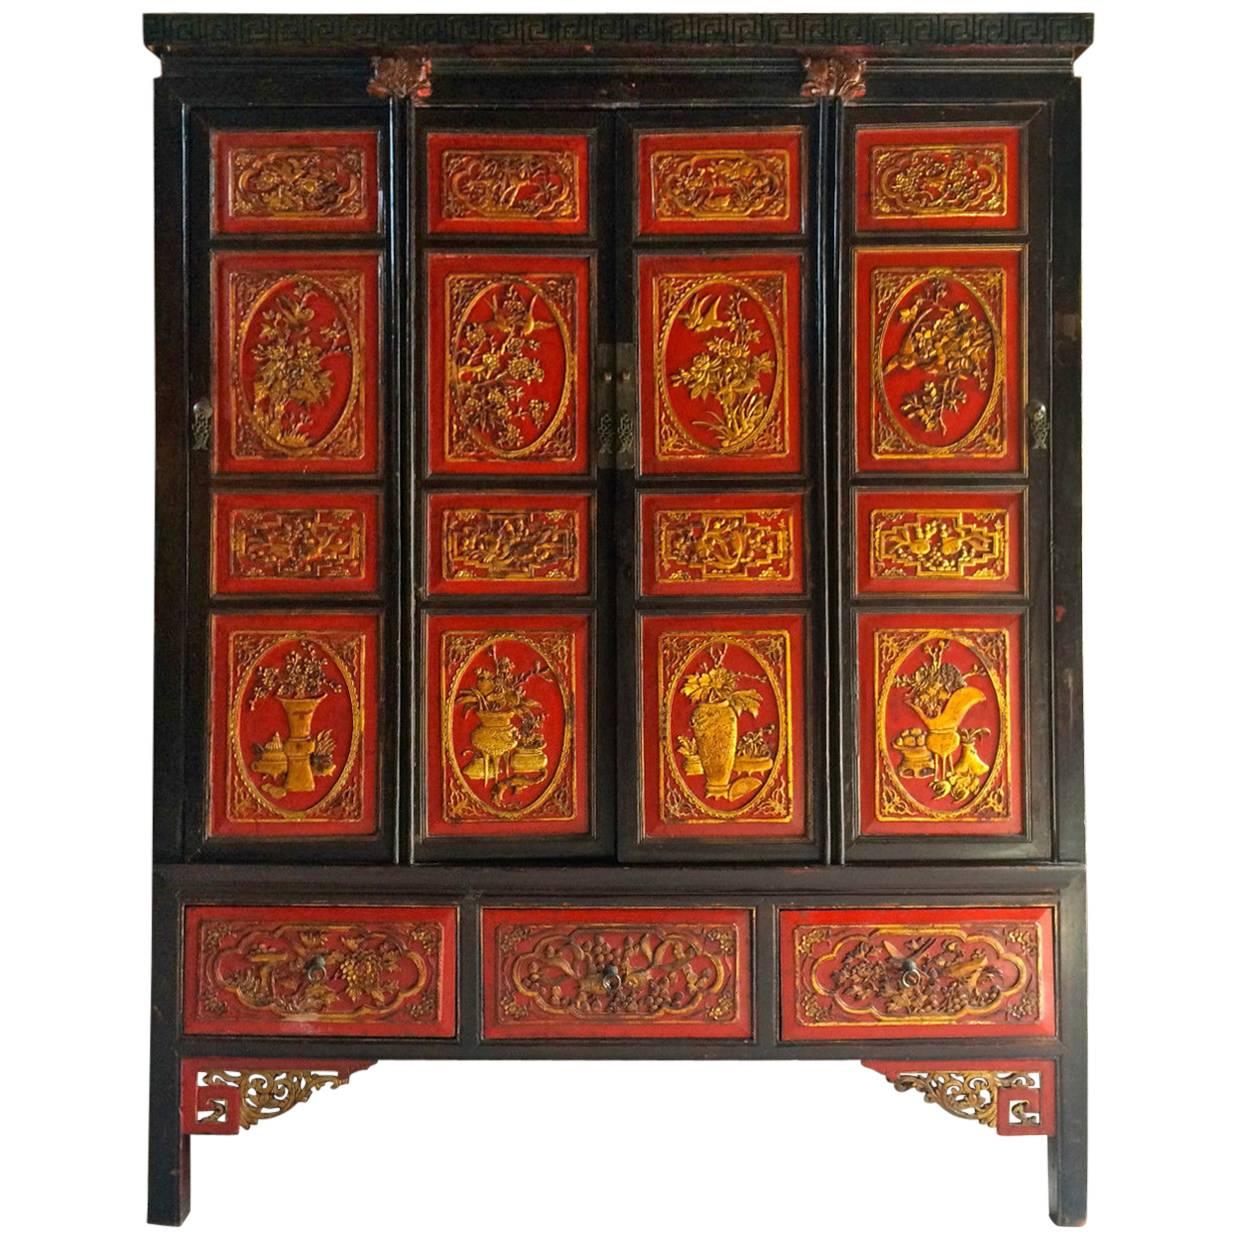 Antique Chinoiserie Wardrobe Armoire Lacquered Oriental Chinese Four Door